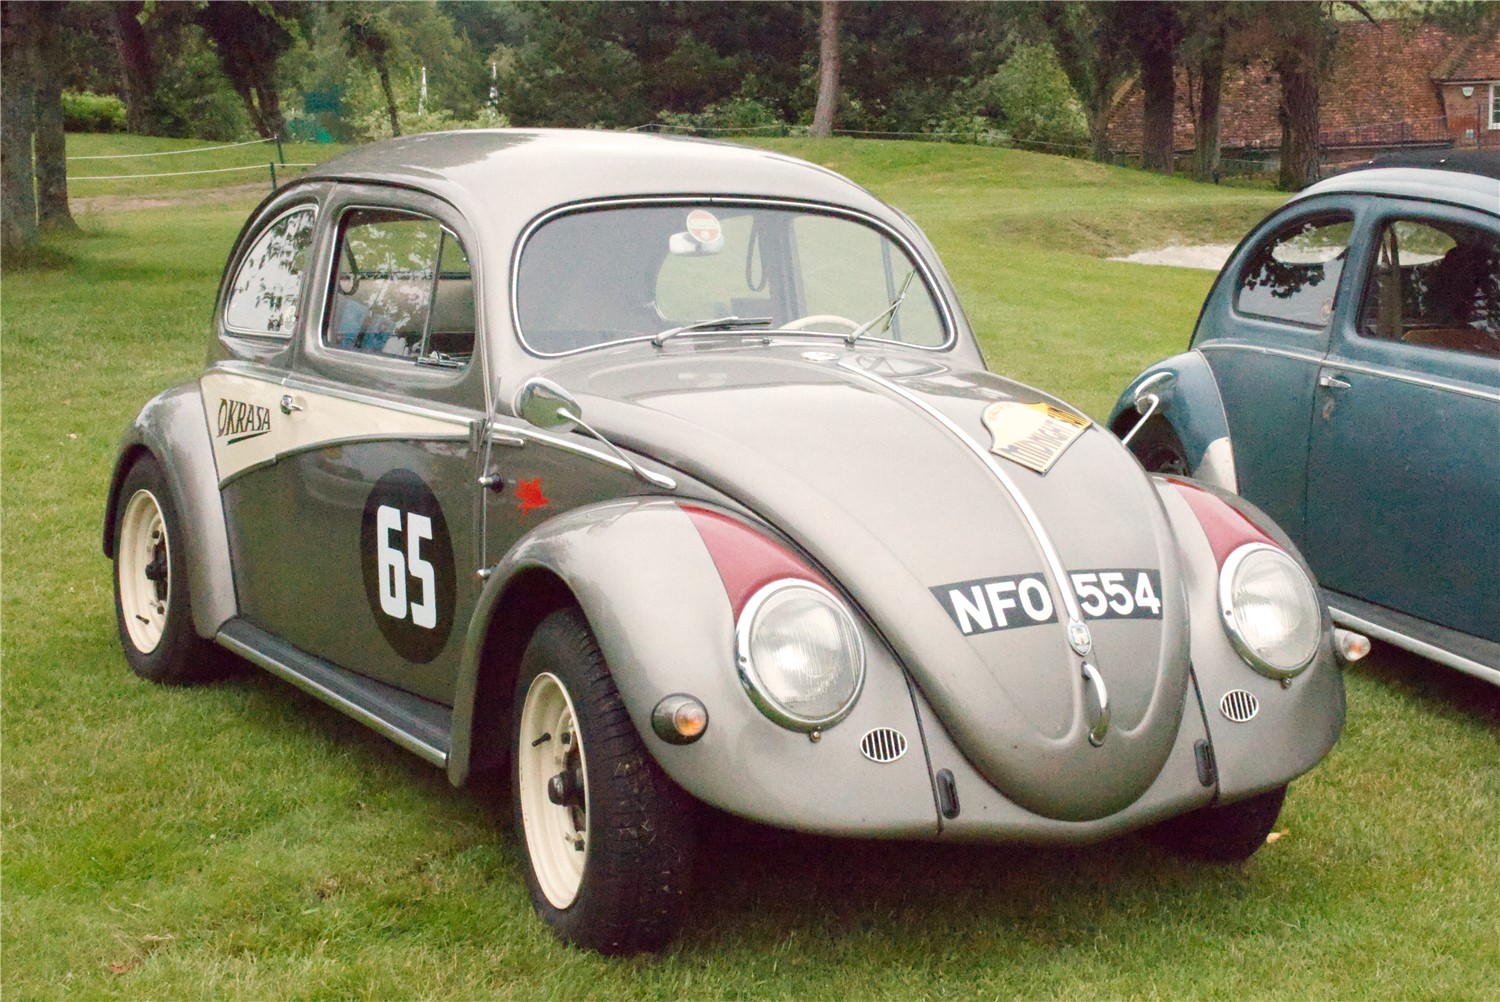 Okrasa OldSpeed Beetle at Classics at the Clubhouse - Aircooled Edition